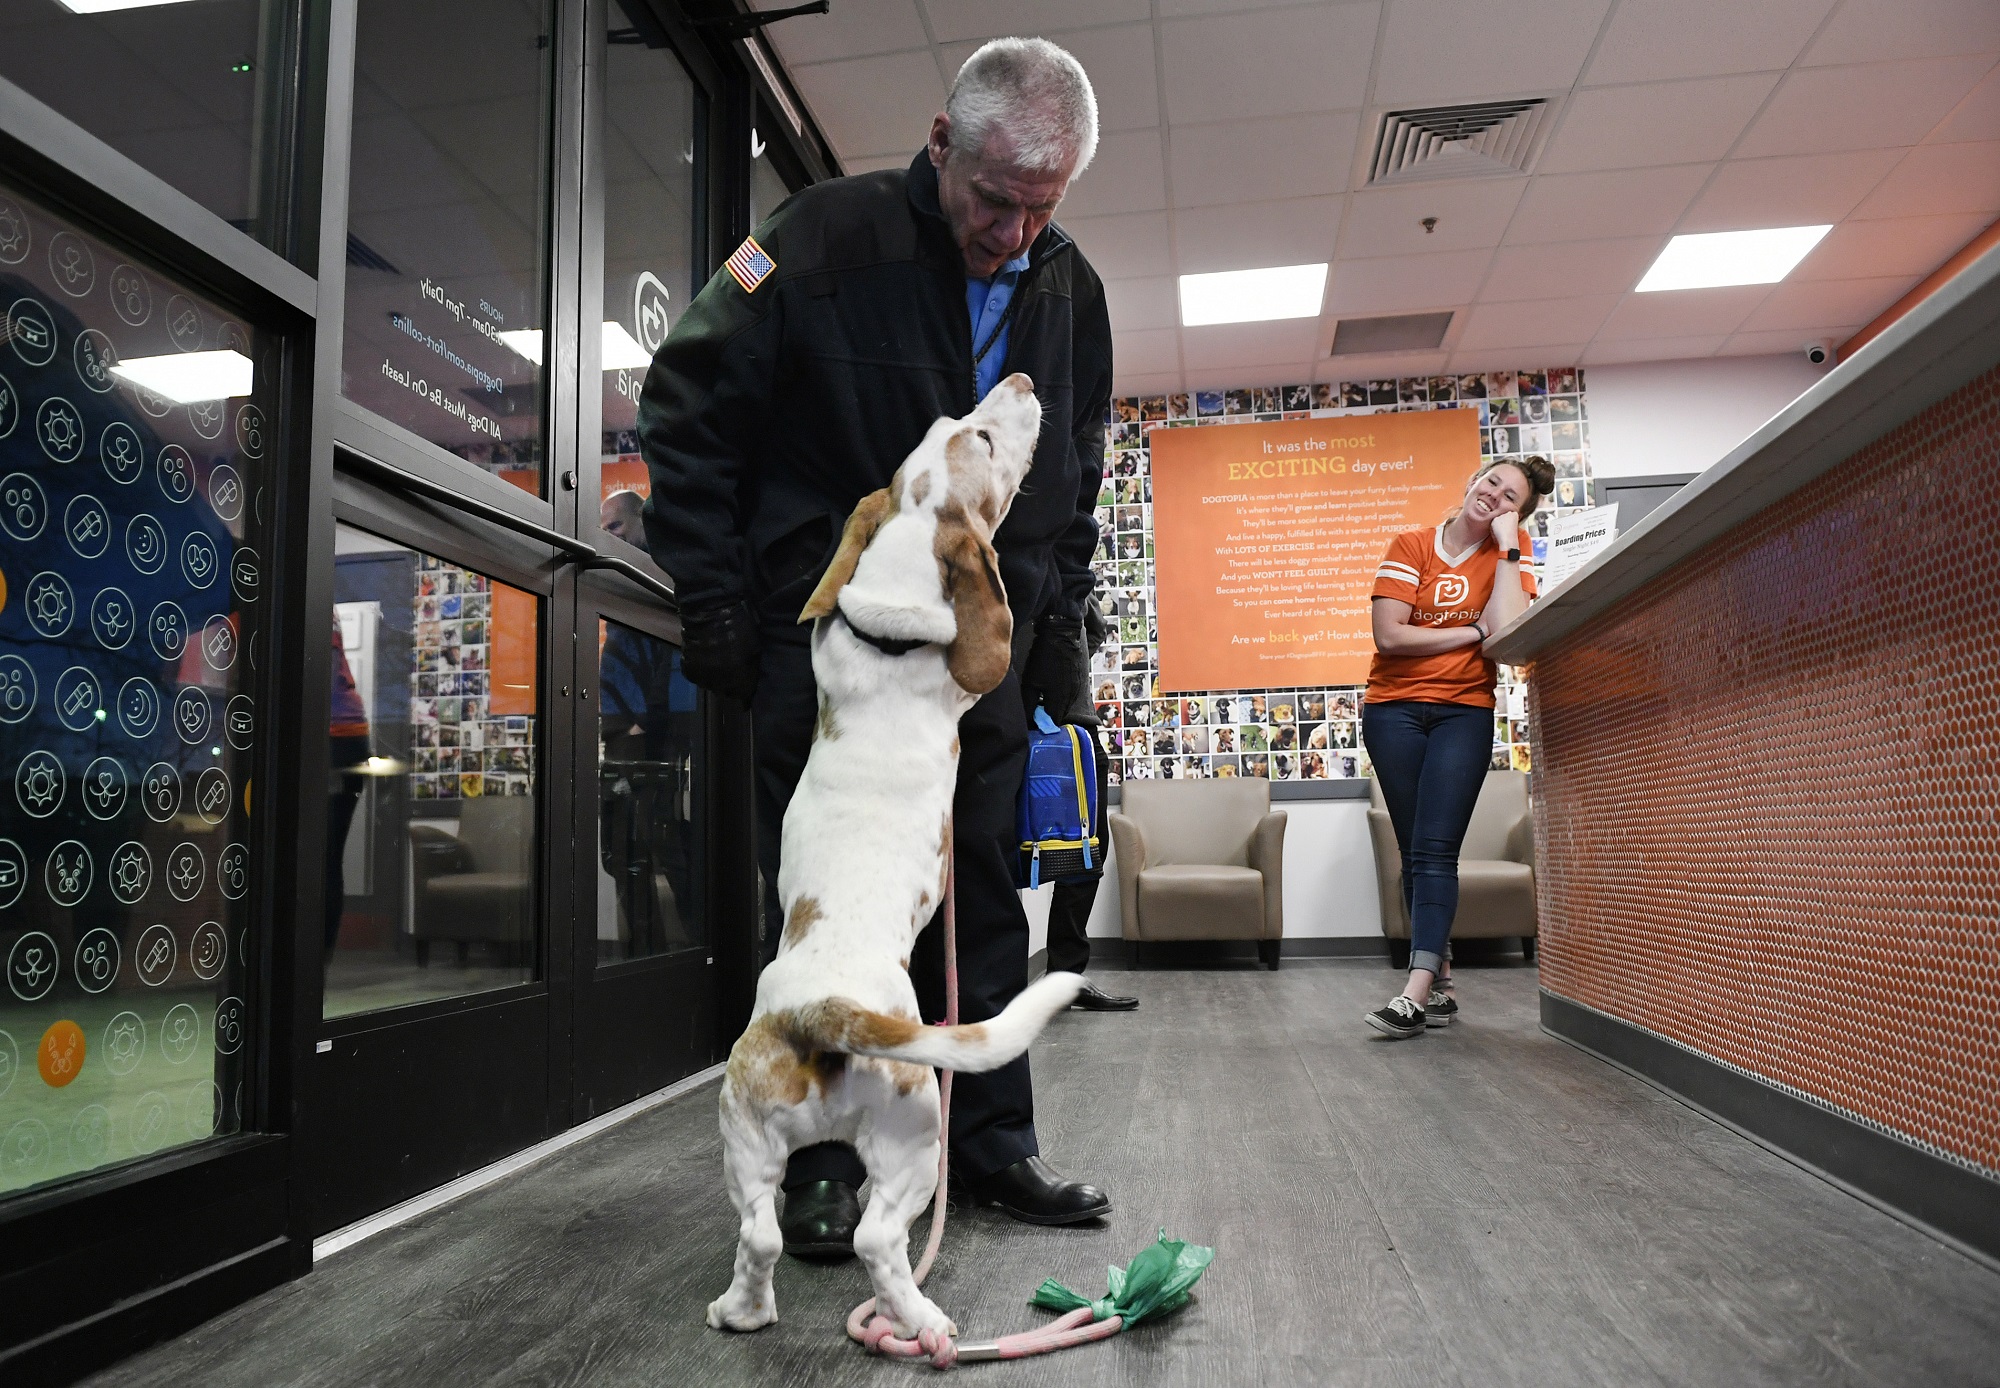 Bongo Billy, a basset hound, jumps with his front paws onto his 'pet parent' during evening pickup in the franchise lobby. 